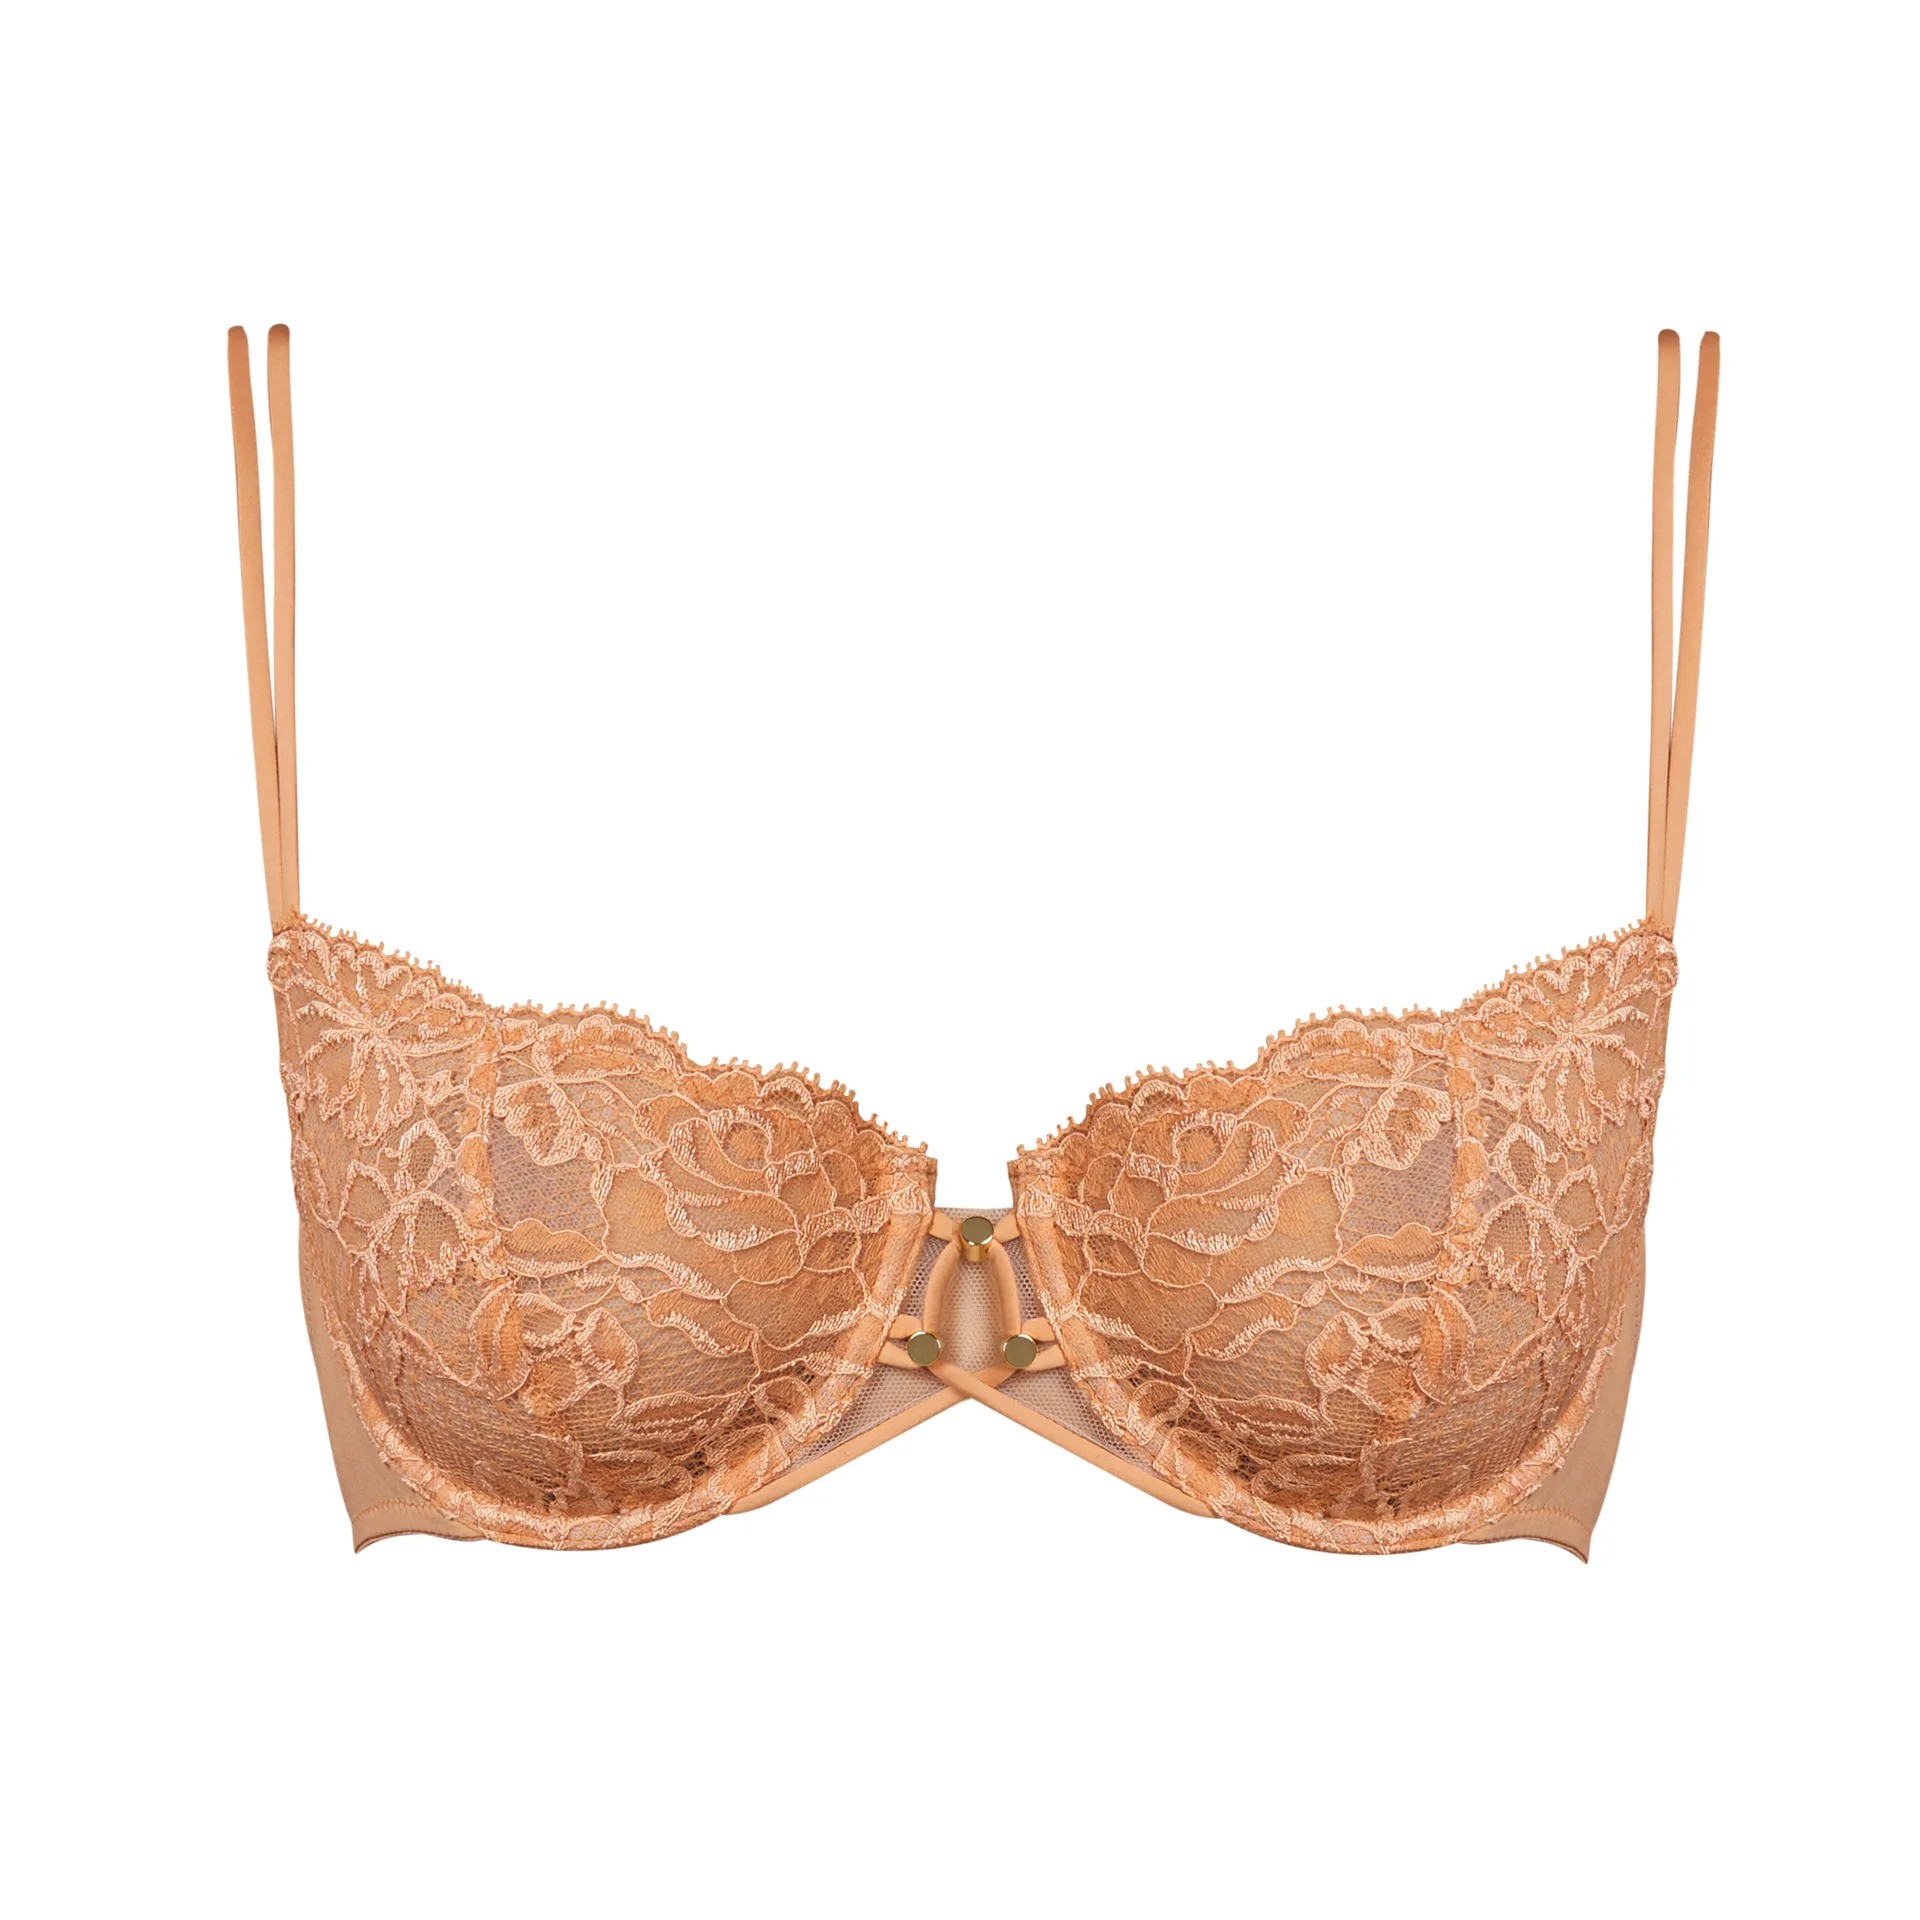 Andres Sarda Nadia Deep Forest Push Up Removable Pads